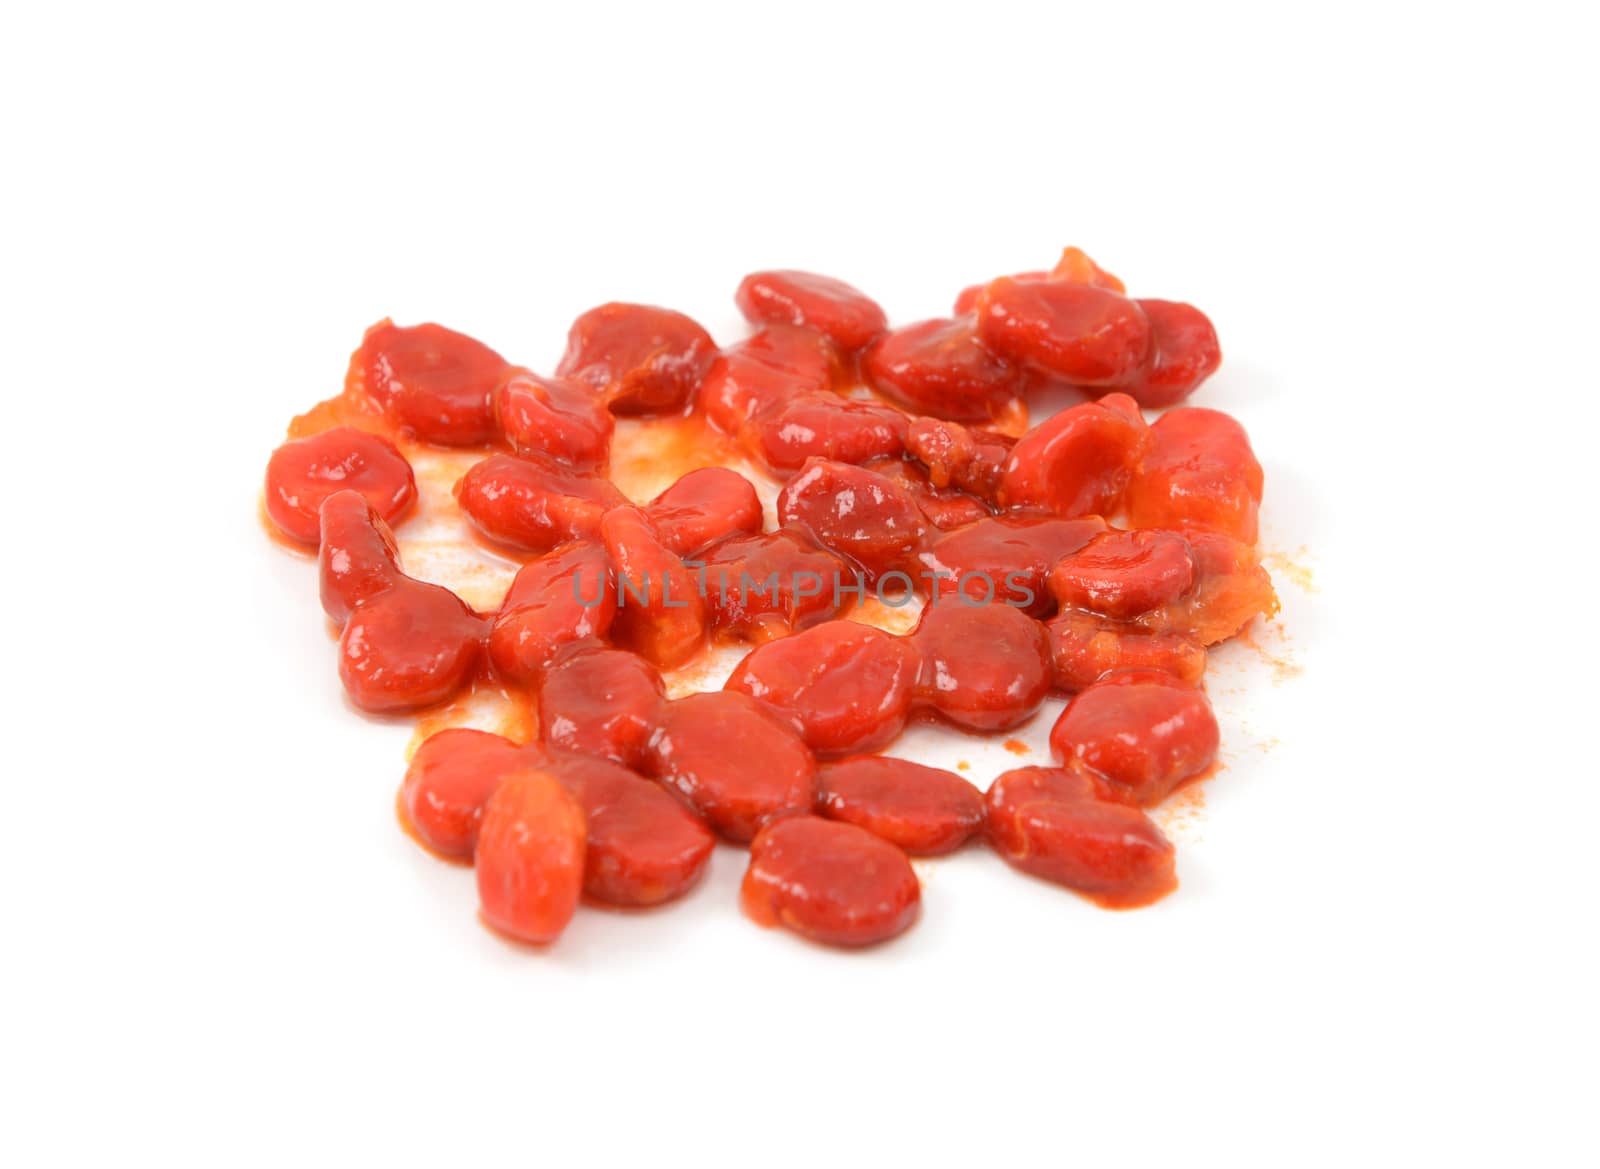 Bitter melon seeds covered in sticky red pith - momordica charantia - isolated on a white background